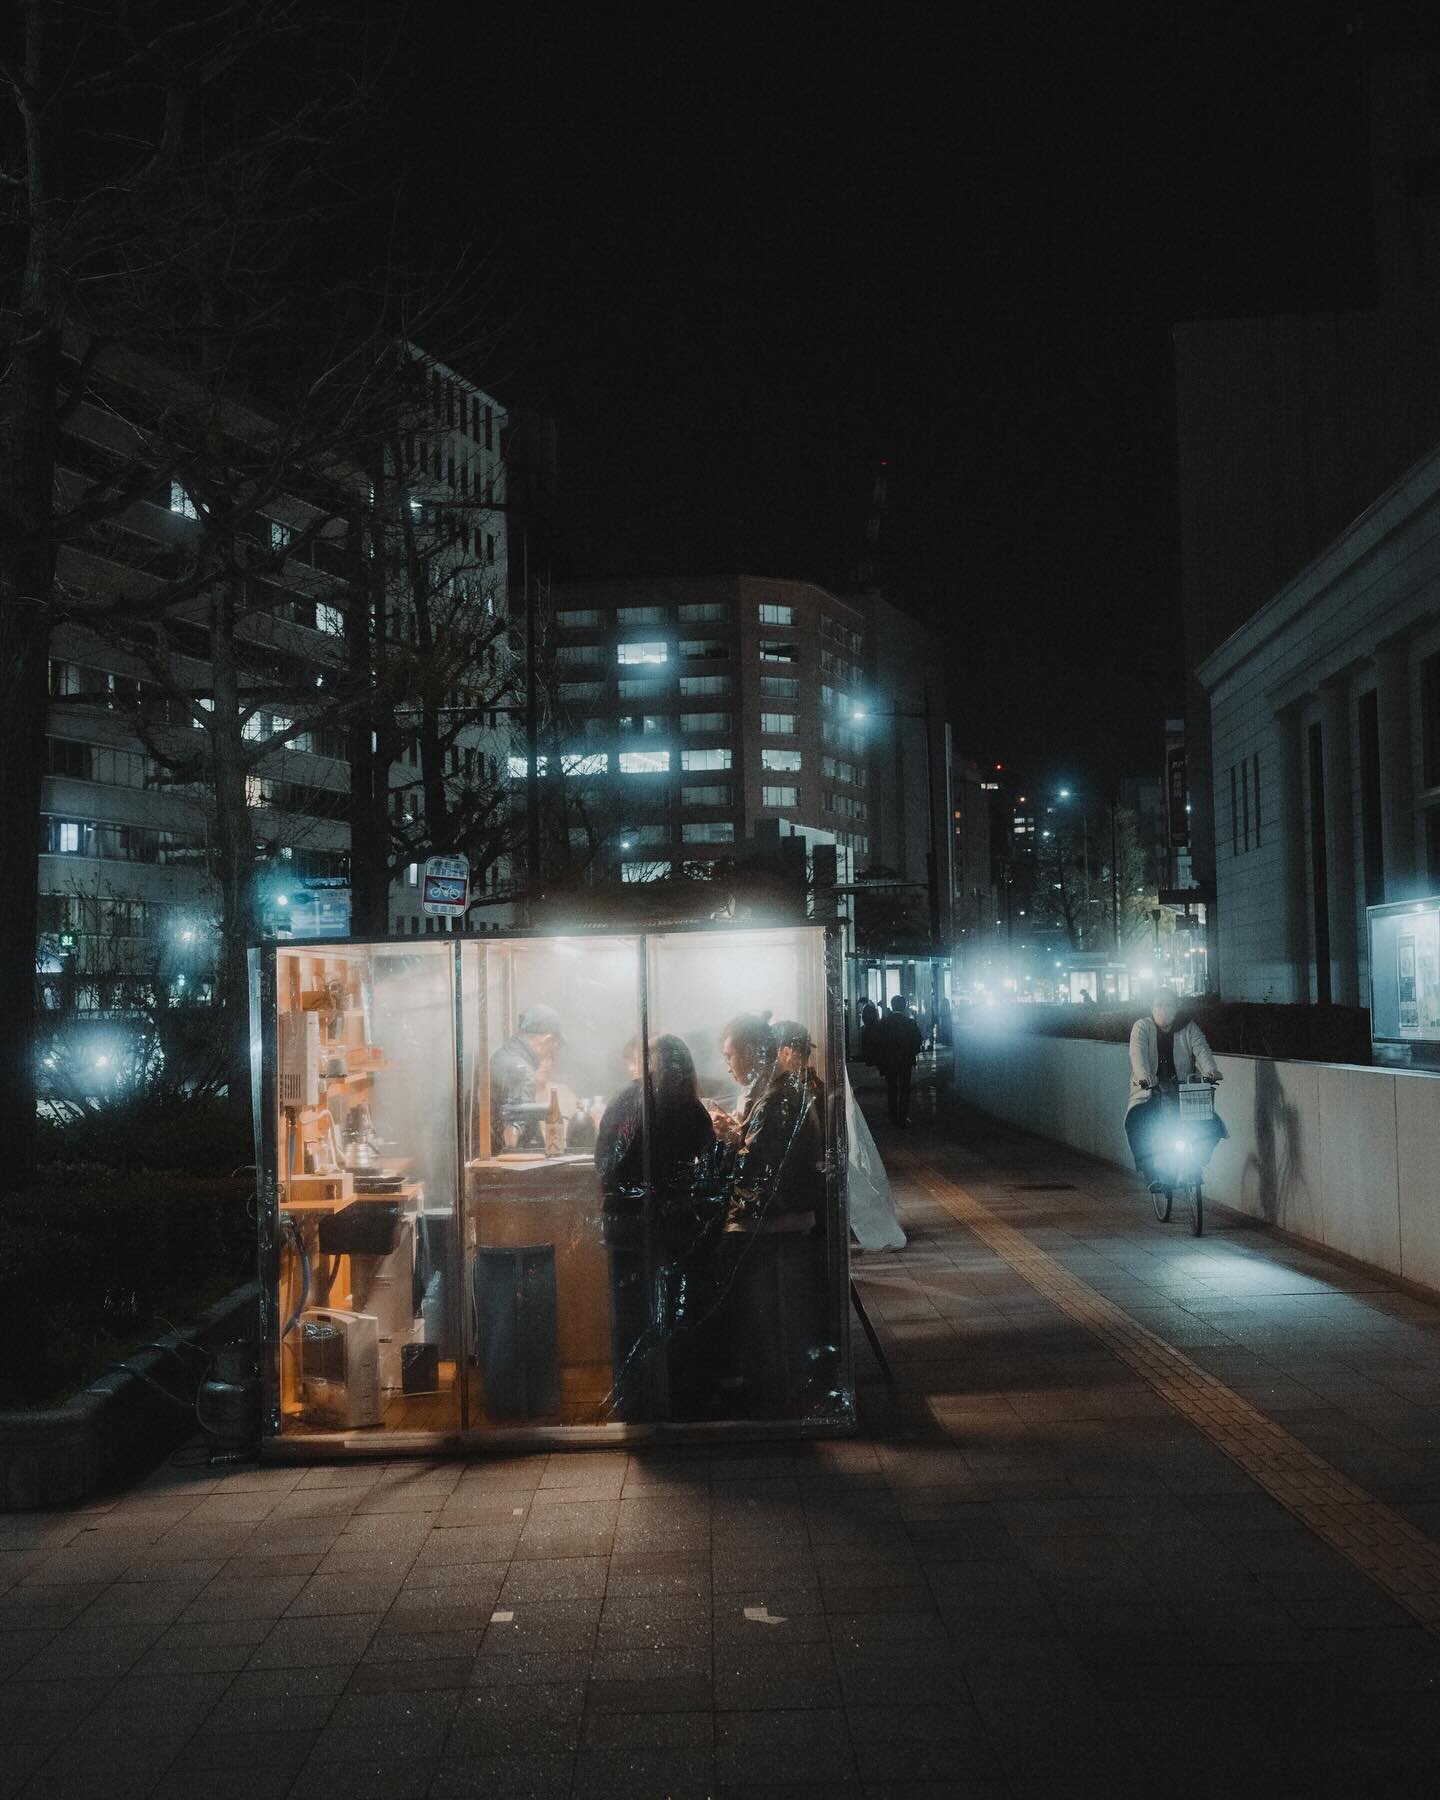 In the city of 屋台 🍜

Fukuoka is known of its yatai culture, small food selling spaces that are slightly different in design to one another, some more modern, some very (japanese) classical. 

Shot on #NikonZ8 + @polarpro MIST filter

#visualspasspor